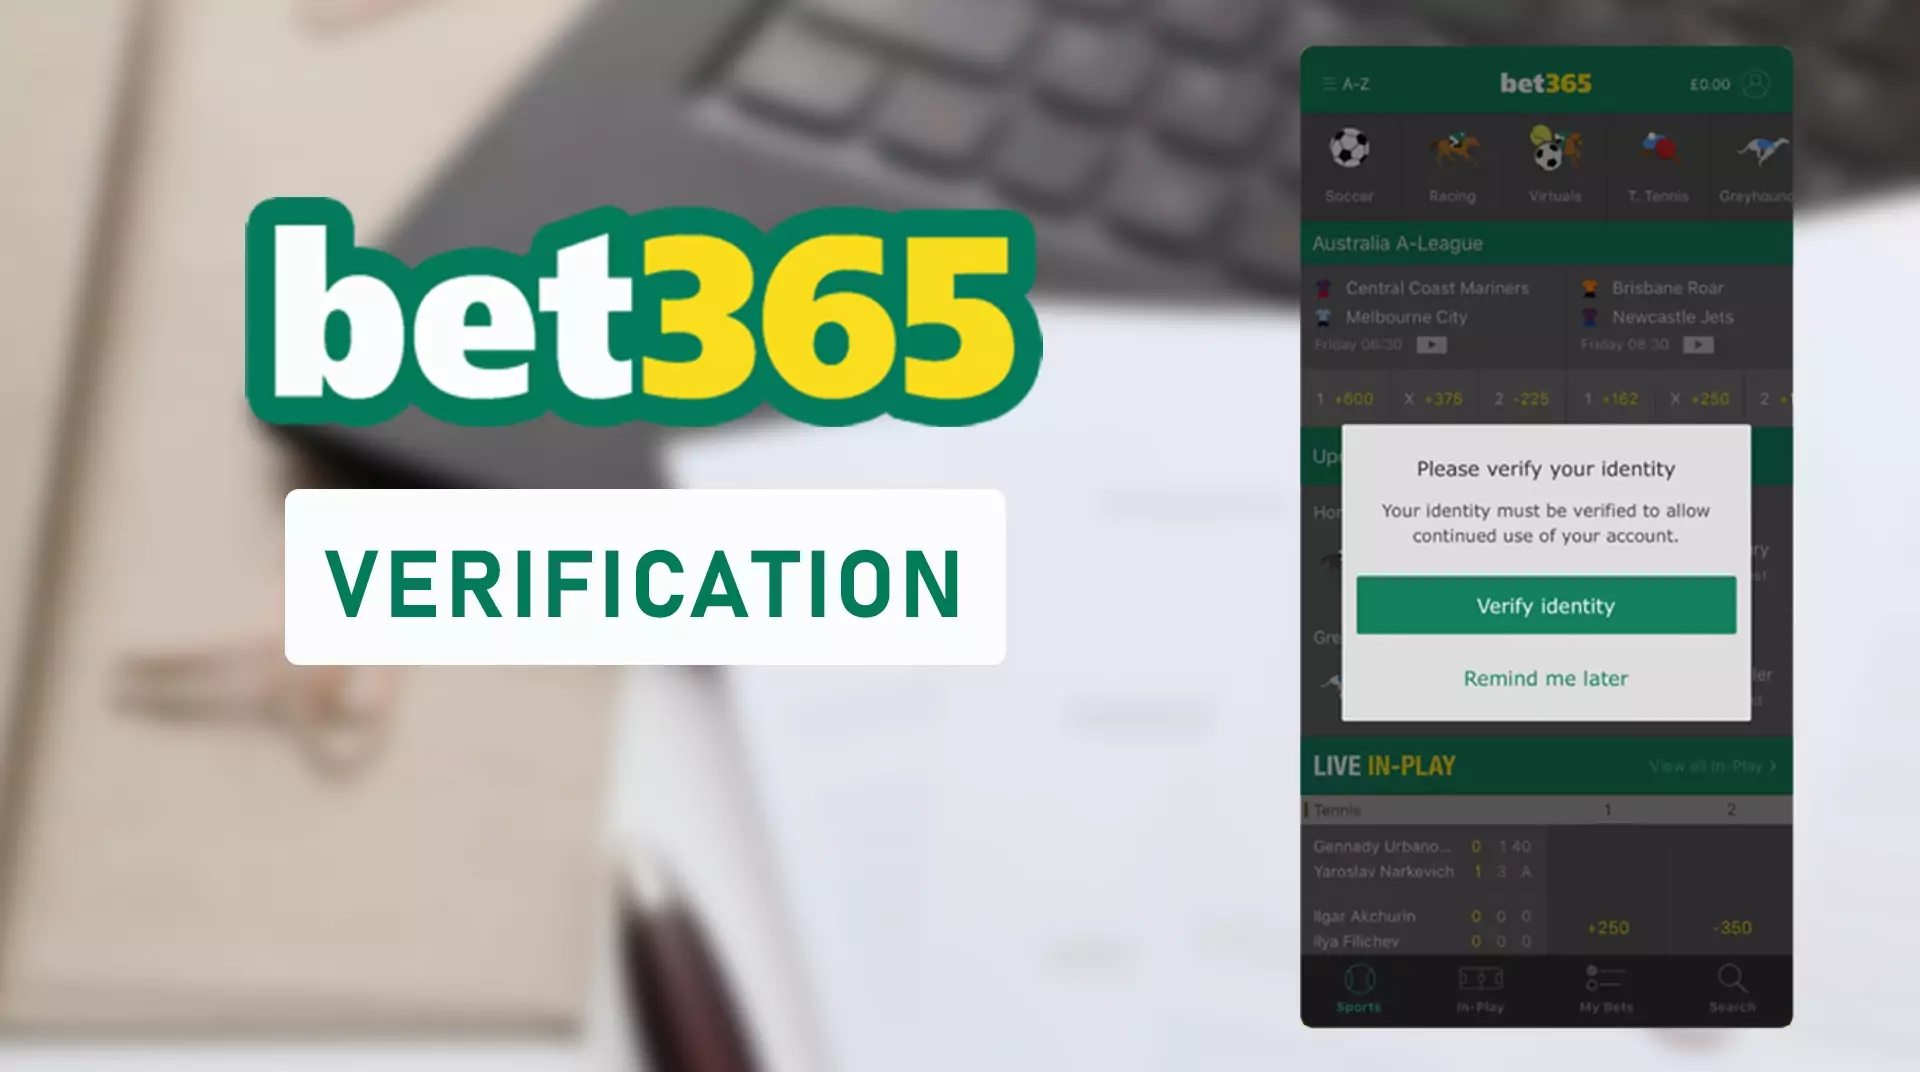 Verify the betting account of Bet365 in order to continue using it.